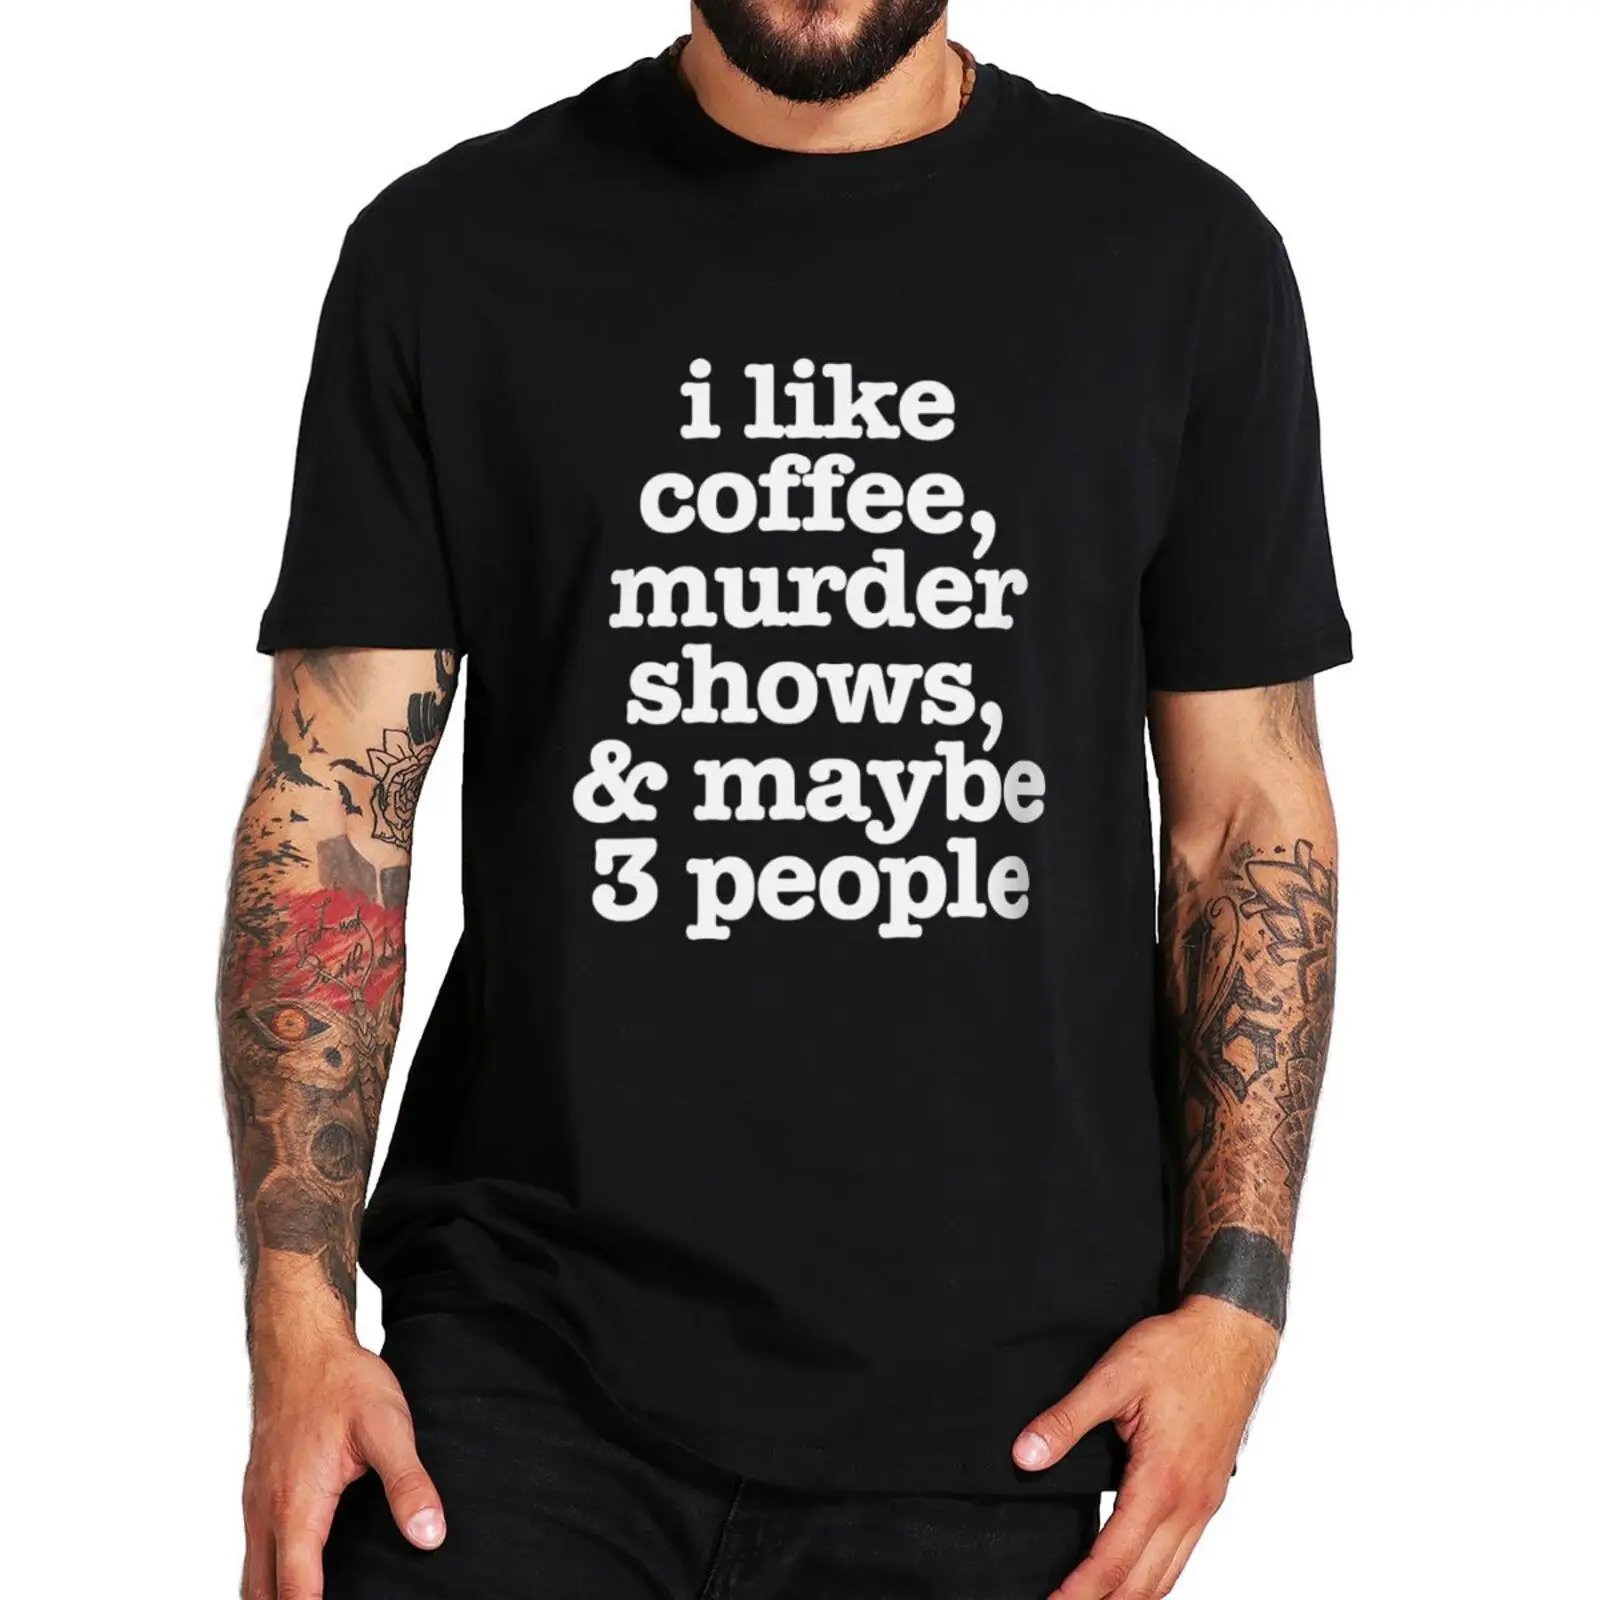 

I Like Coffee Murder Shows And Maybe 3 People T Shirt Funny Jokes Humro Tops Casual 100% Cotton Unisex O-neck T-shirt EU Size